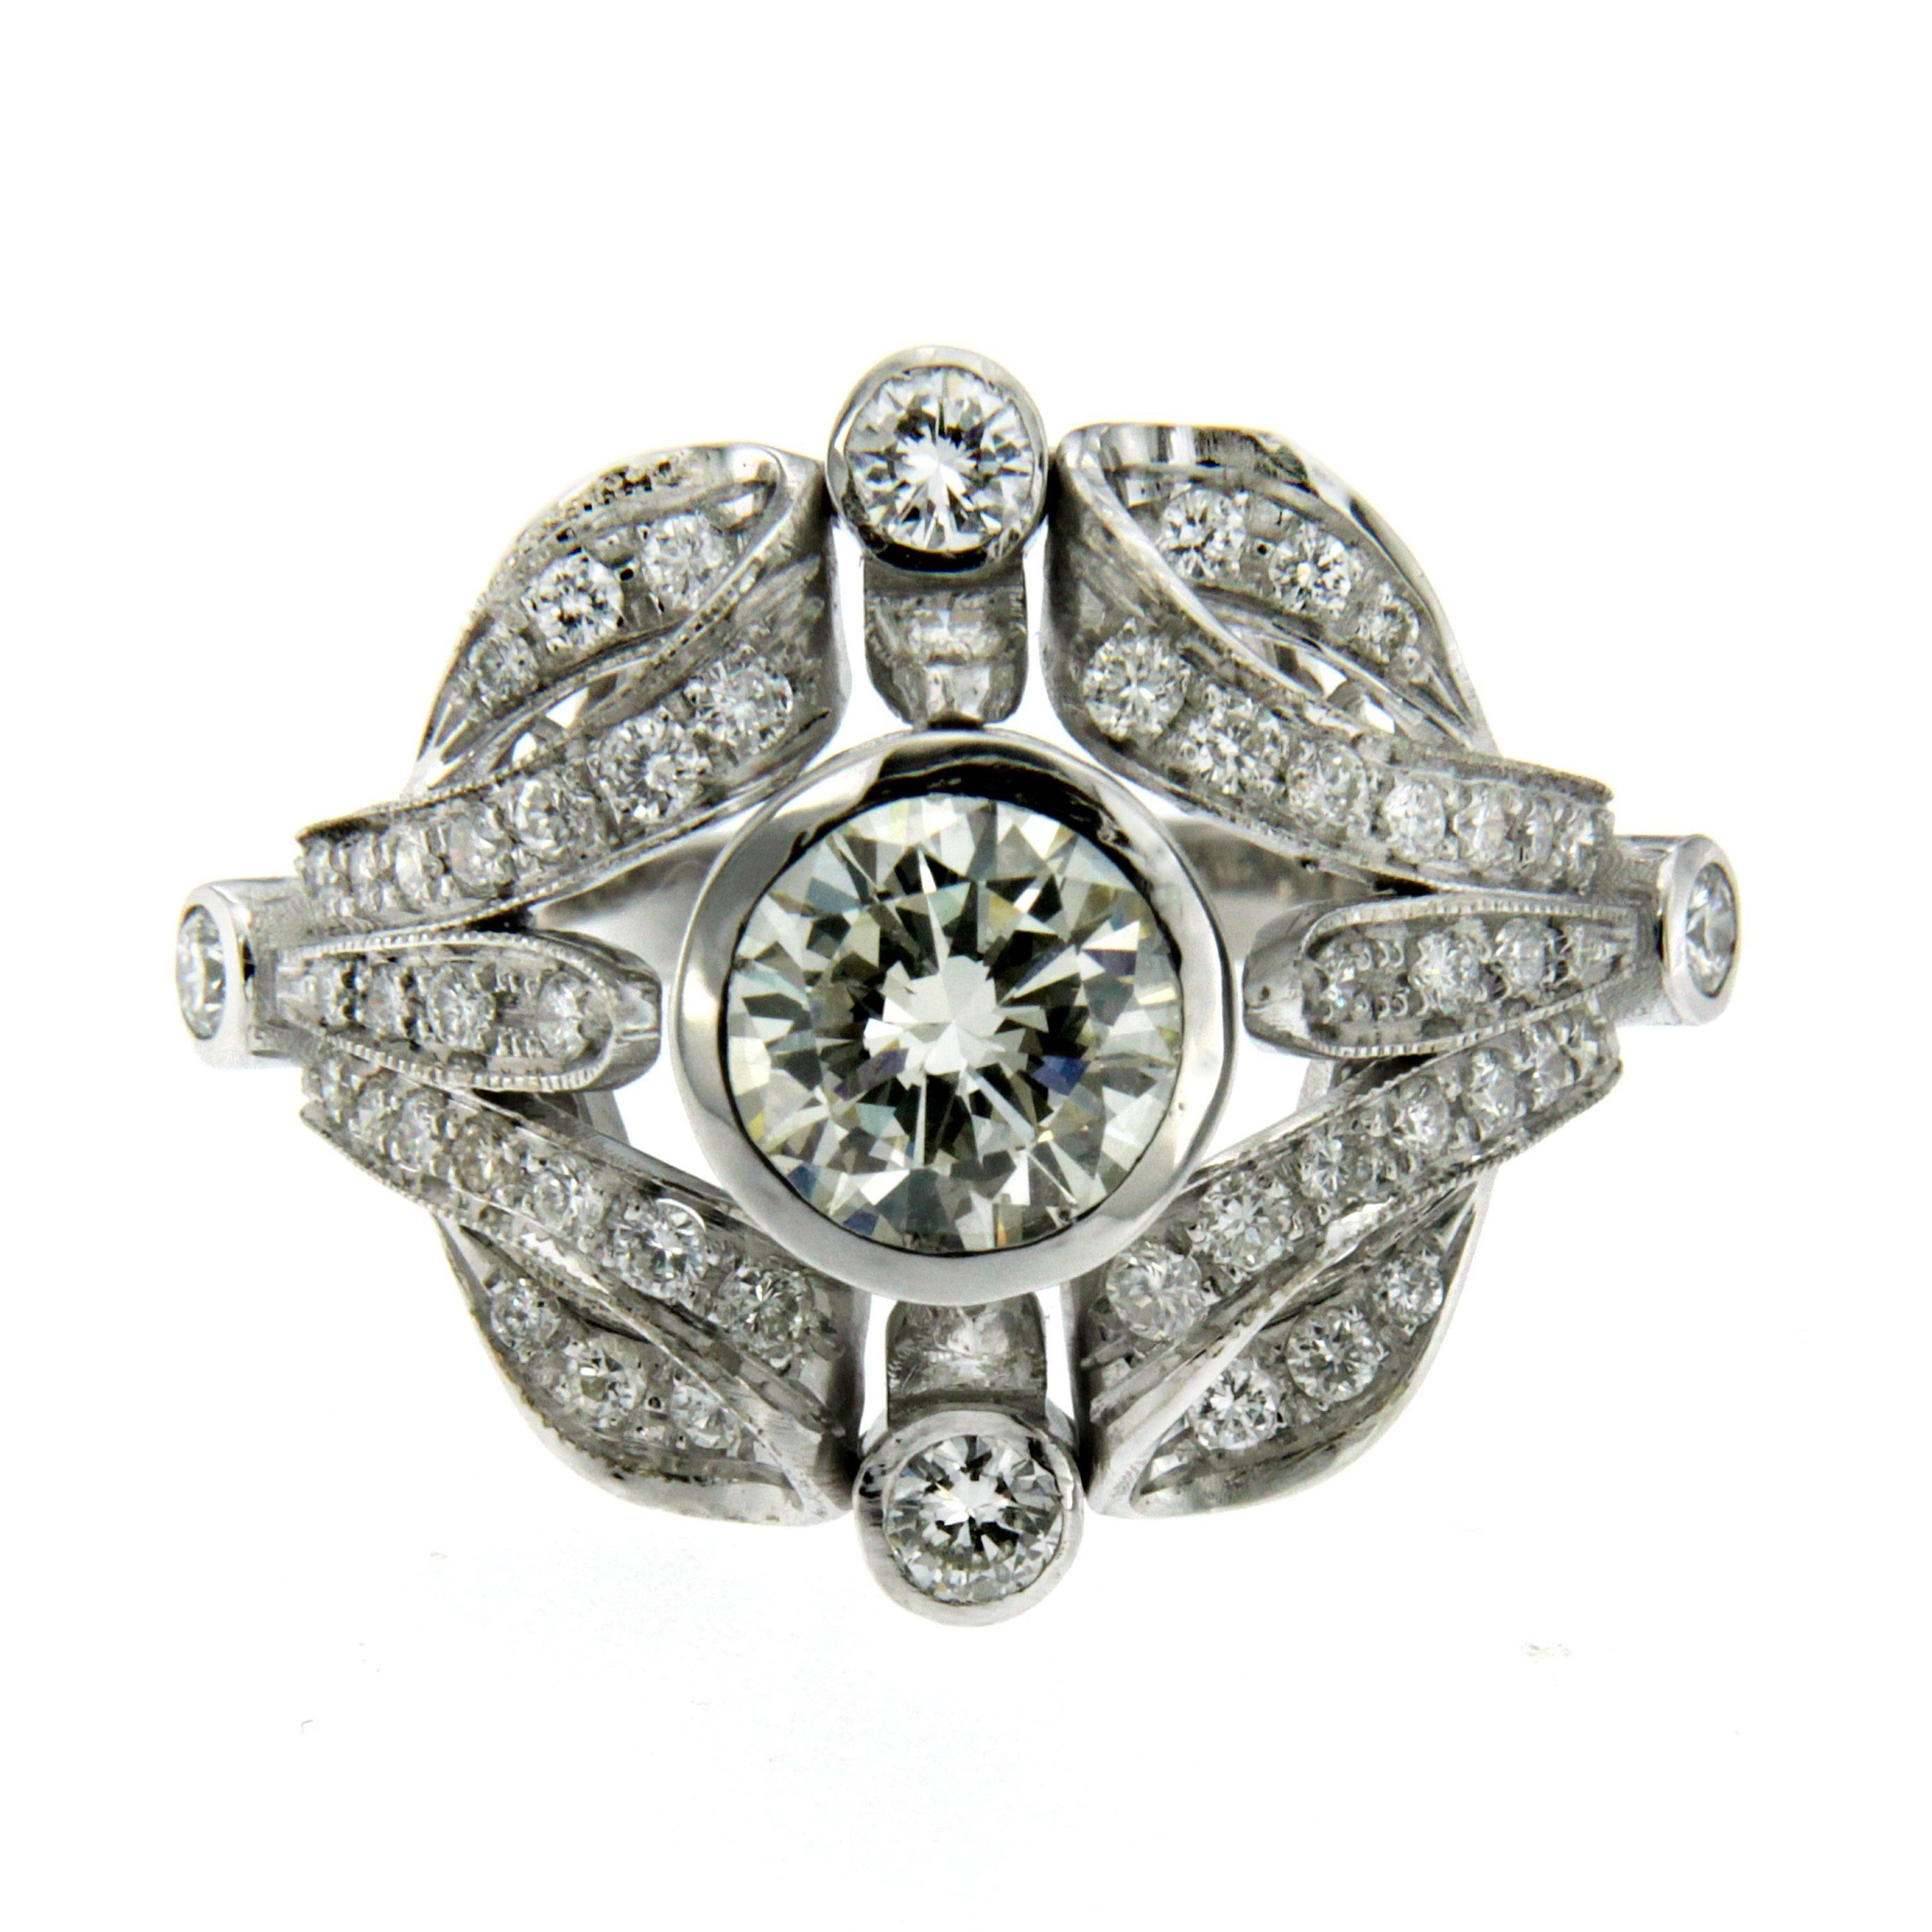 Authentic Art Deco engagement ring. 
The ring is centered with a prominent 1.50cts old mine-cut diamond, graded J color and VS1 clarity, surrounded by 54 round cut diamonds, weighing cumulatively 1.07 cts, graded G-H color and VVS. Circa